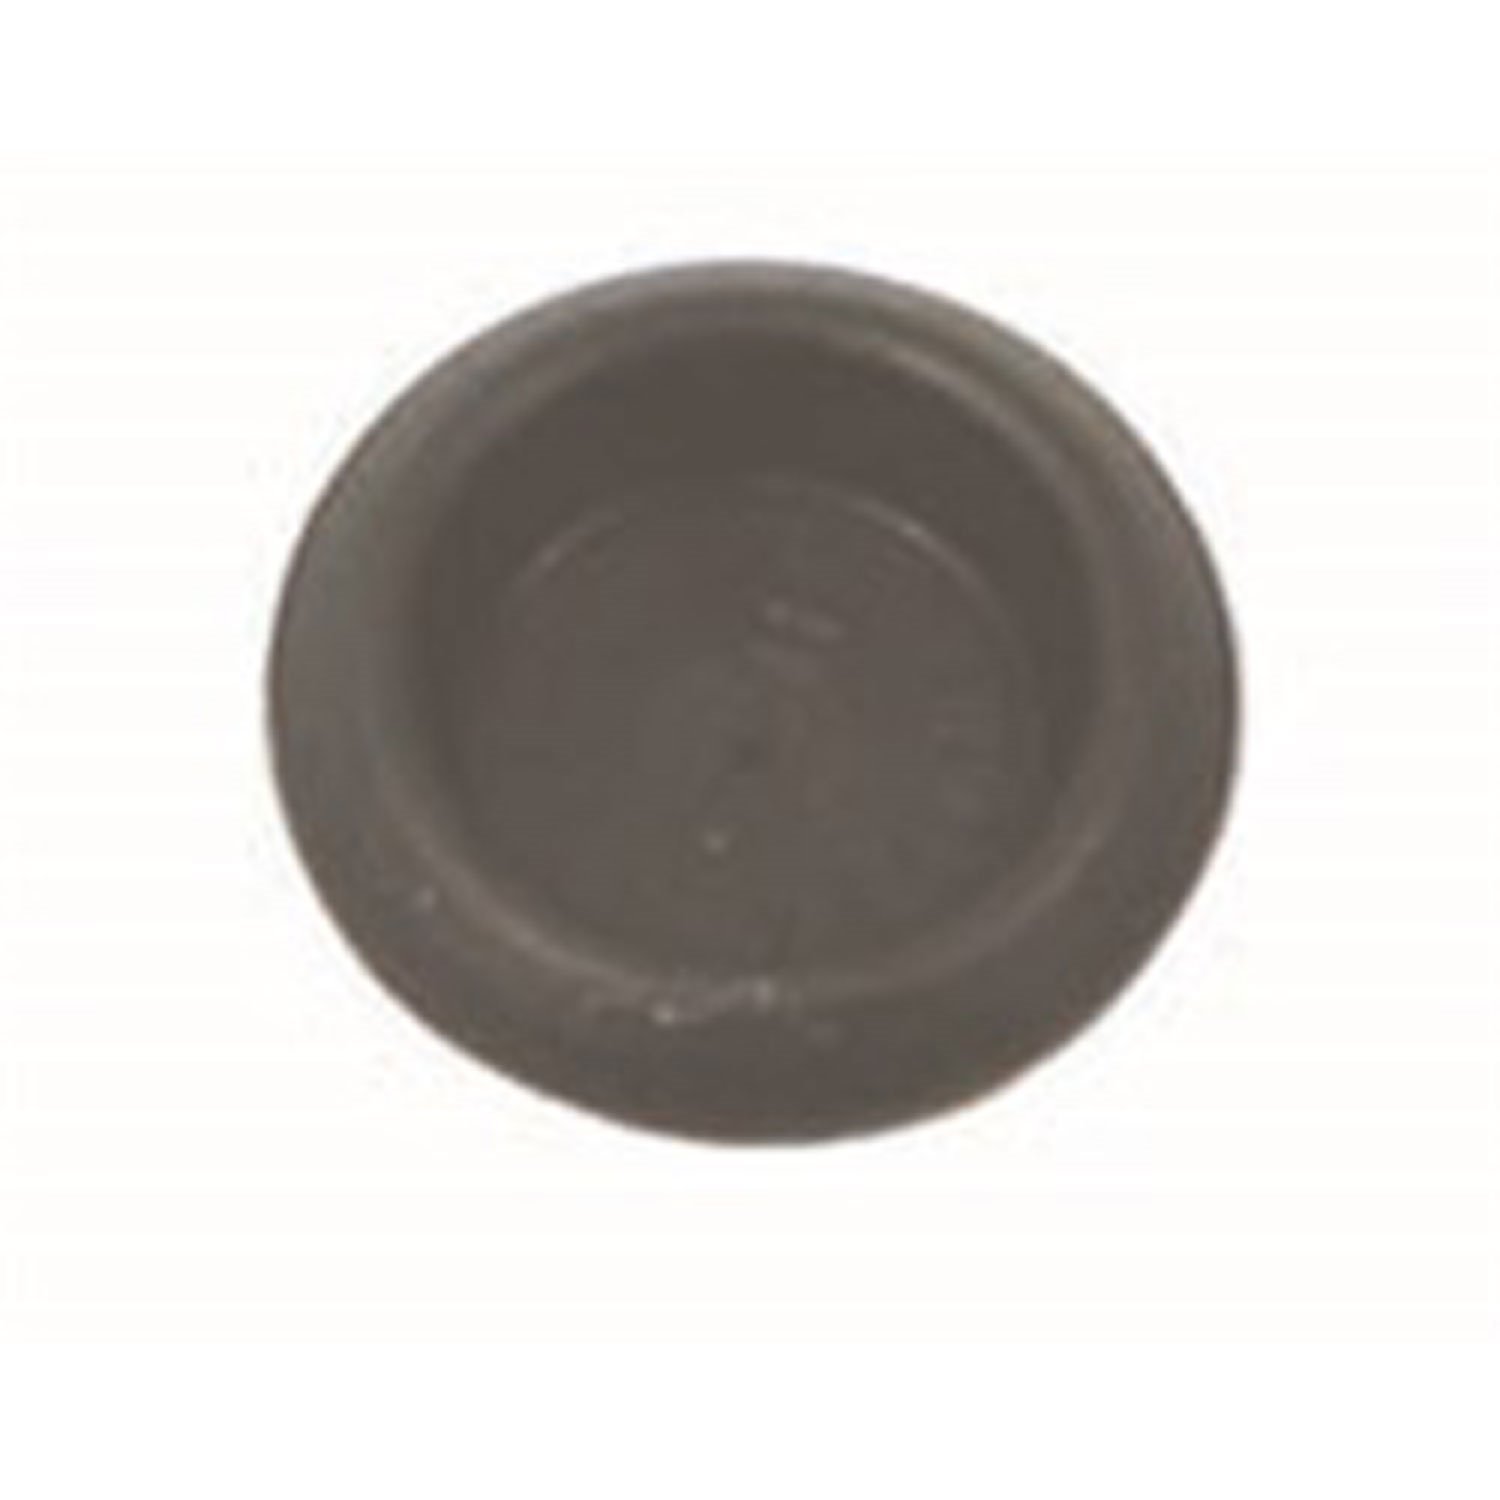 Replacement 1 inch drain plug from Omix-ADA, Fits floor pan drain holes in 76-86 Jeep CJ7 and 81-86 Jeep CJ8